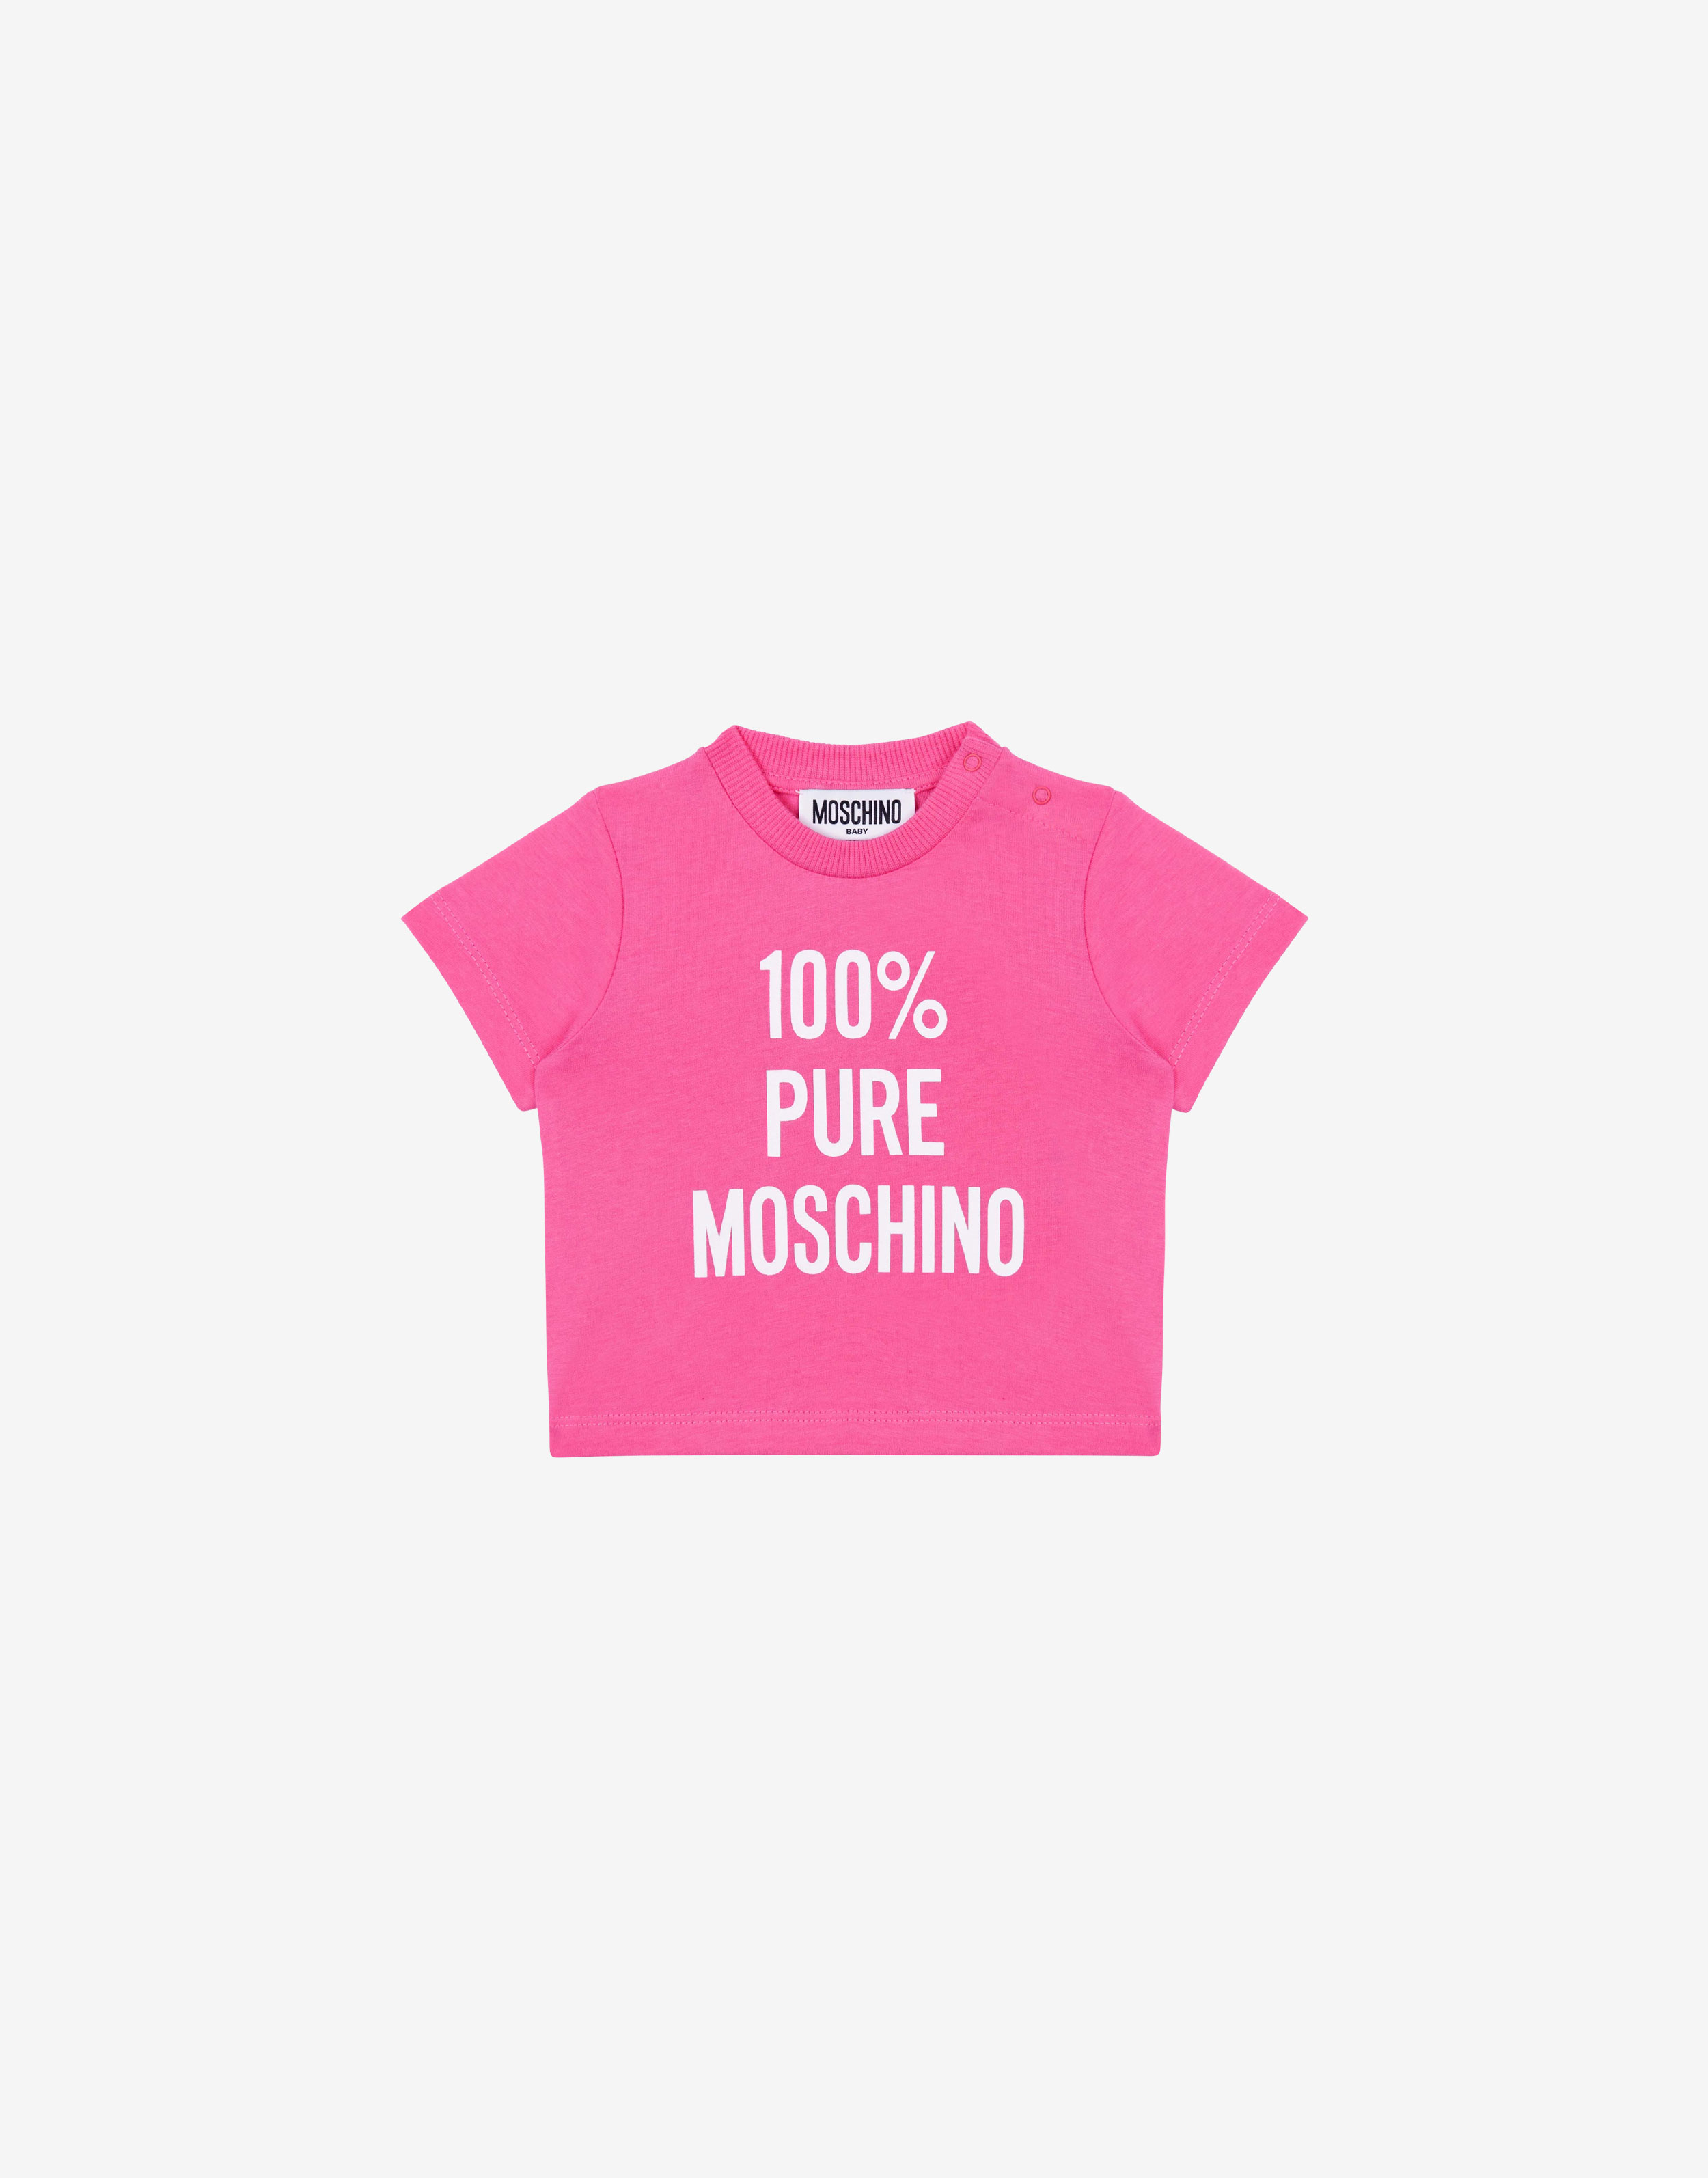 MOSCHINO BABY: leggings in cotton - Blue  Moschino Baby pants MRP02RLCA60  online at